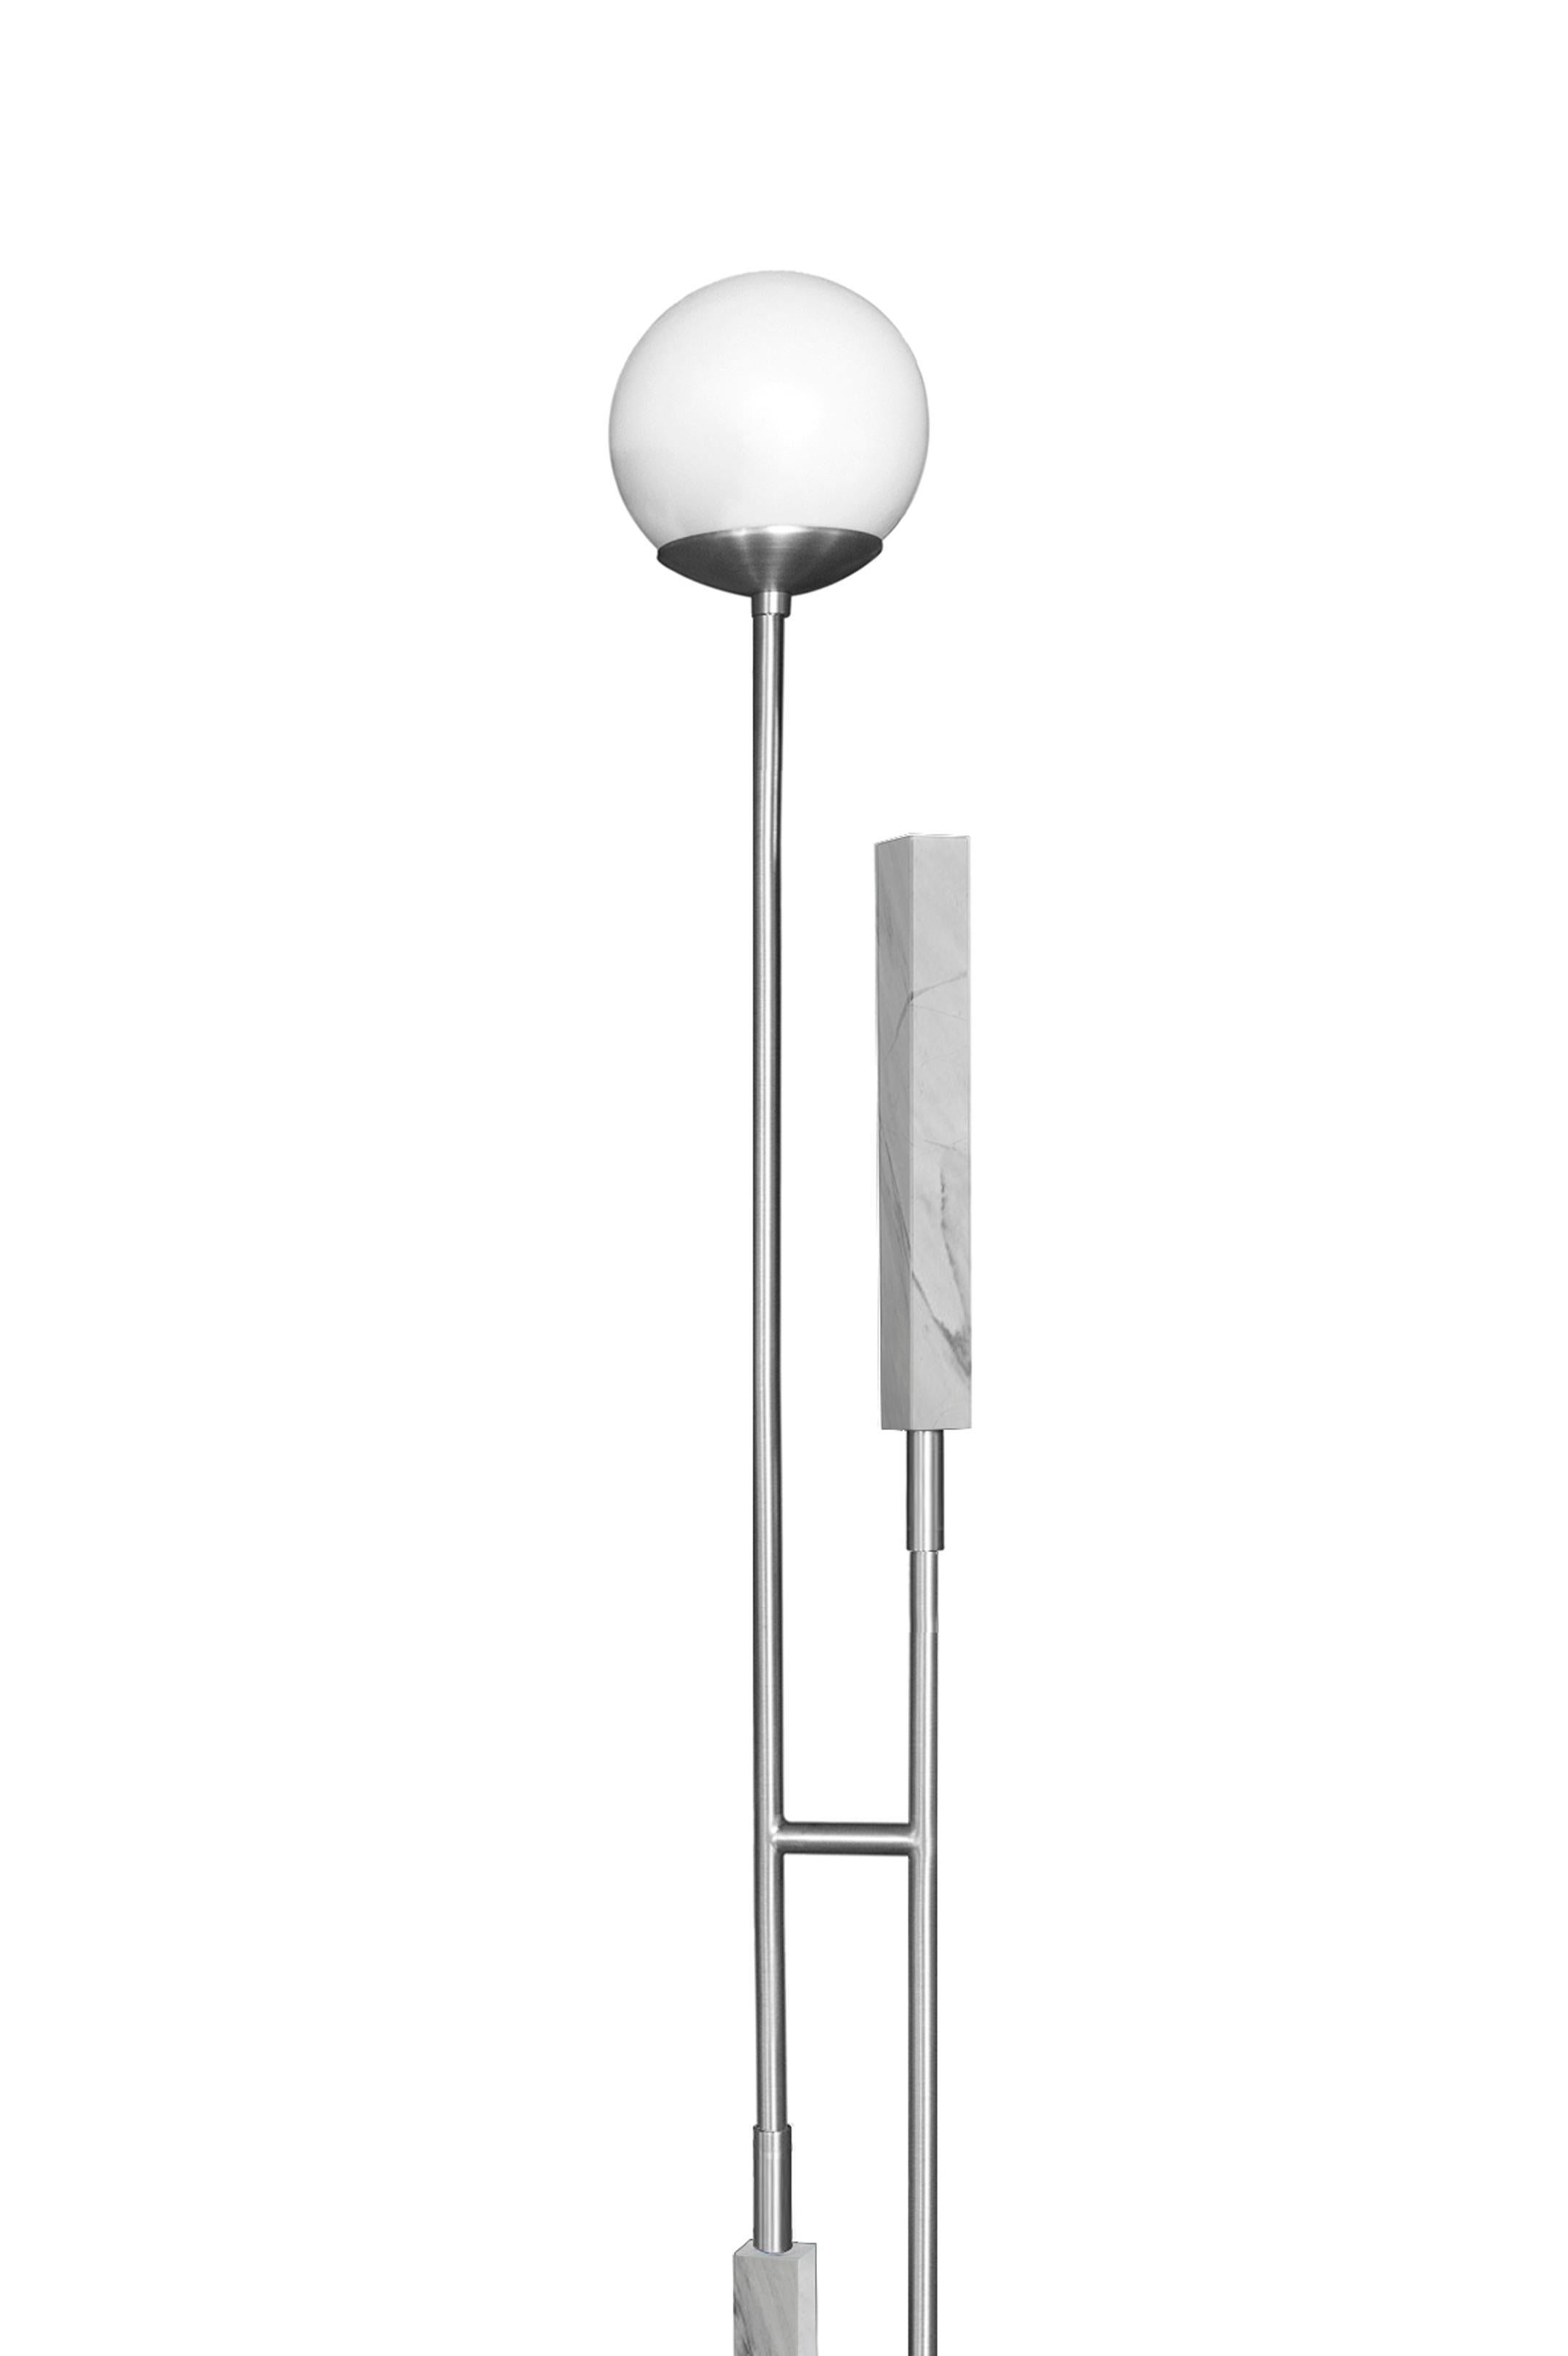 Modern  MINIMAL FLOOR LAMP,  Handcrafted Marble Utility Sculpture Lamp by Rebeca Cors